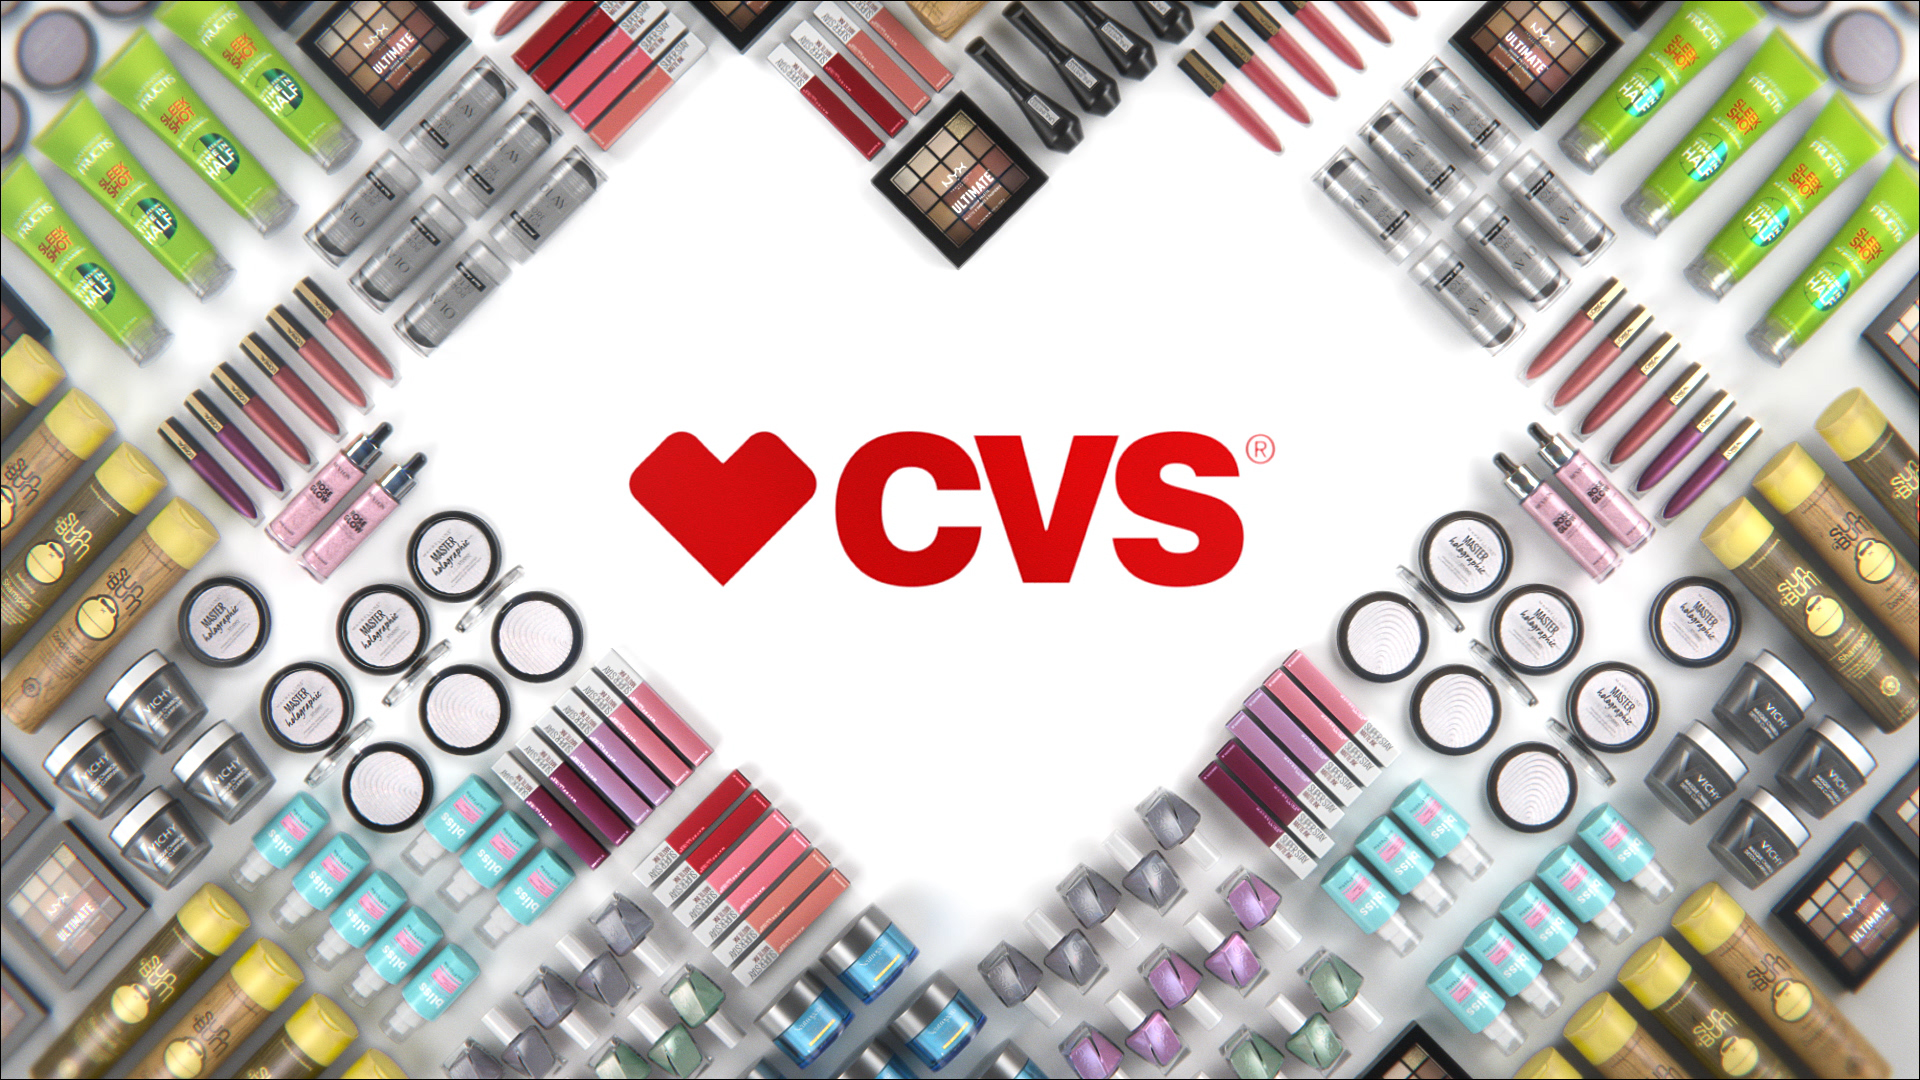 Hey you. 👋 Want to hear something EPIC? @CVS_beauty's Epic Beauty event is  happening now through 4/8 at all CVS locations. 😮 Vis